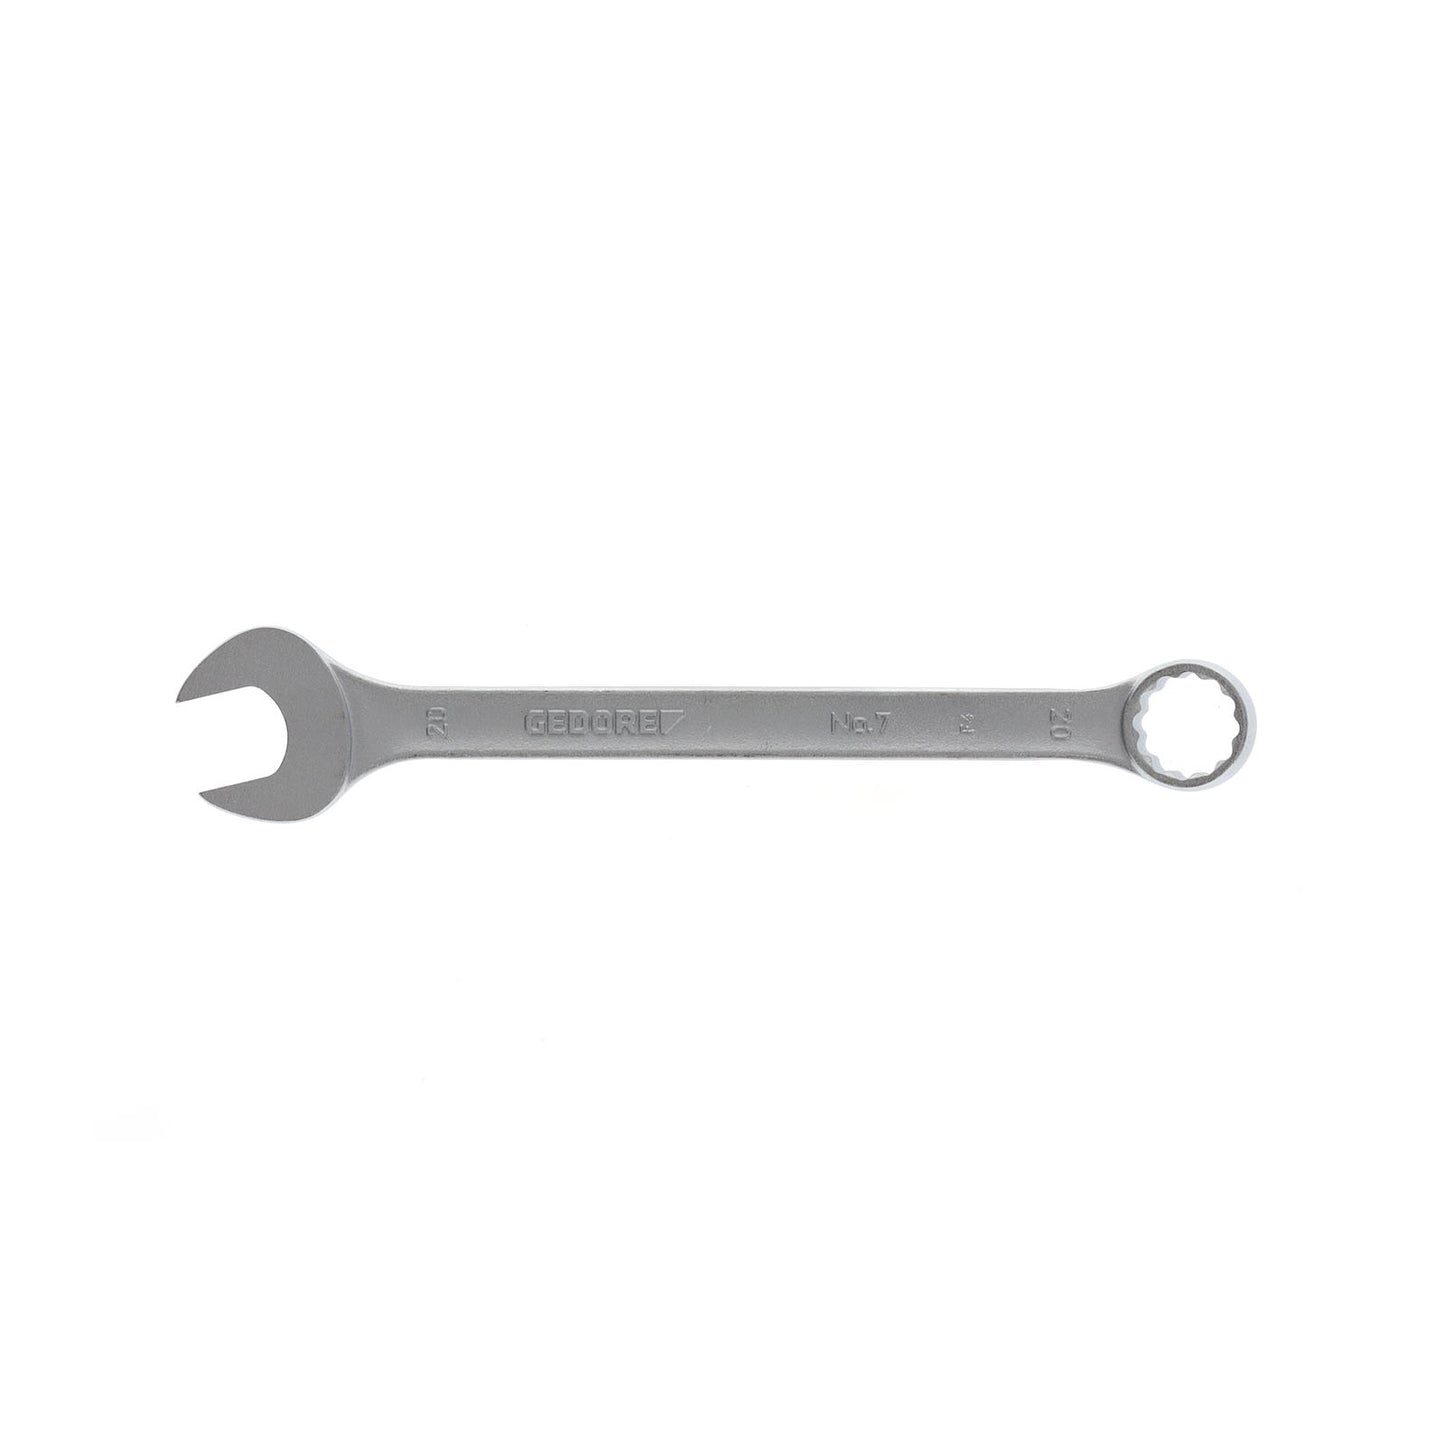 GEDORE 7 20 - Combination Wrench, 20 mm (6091960)